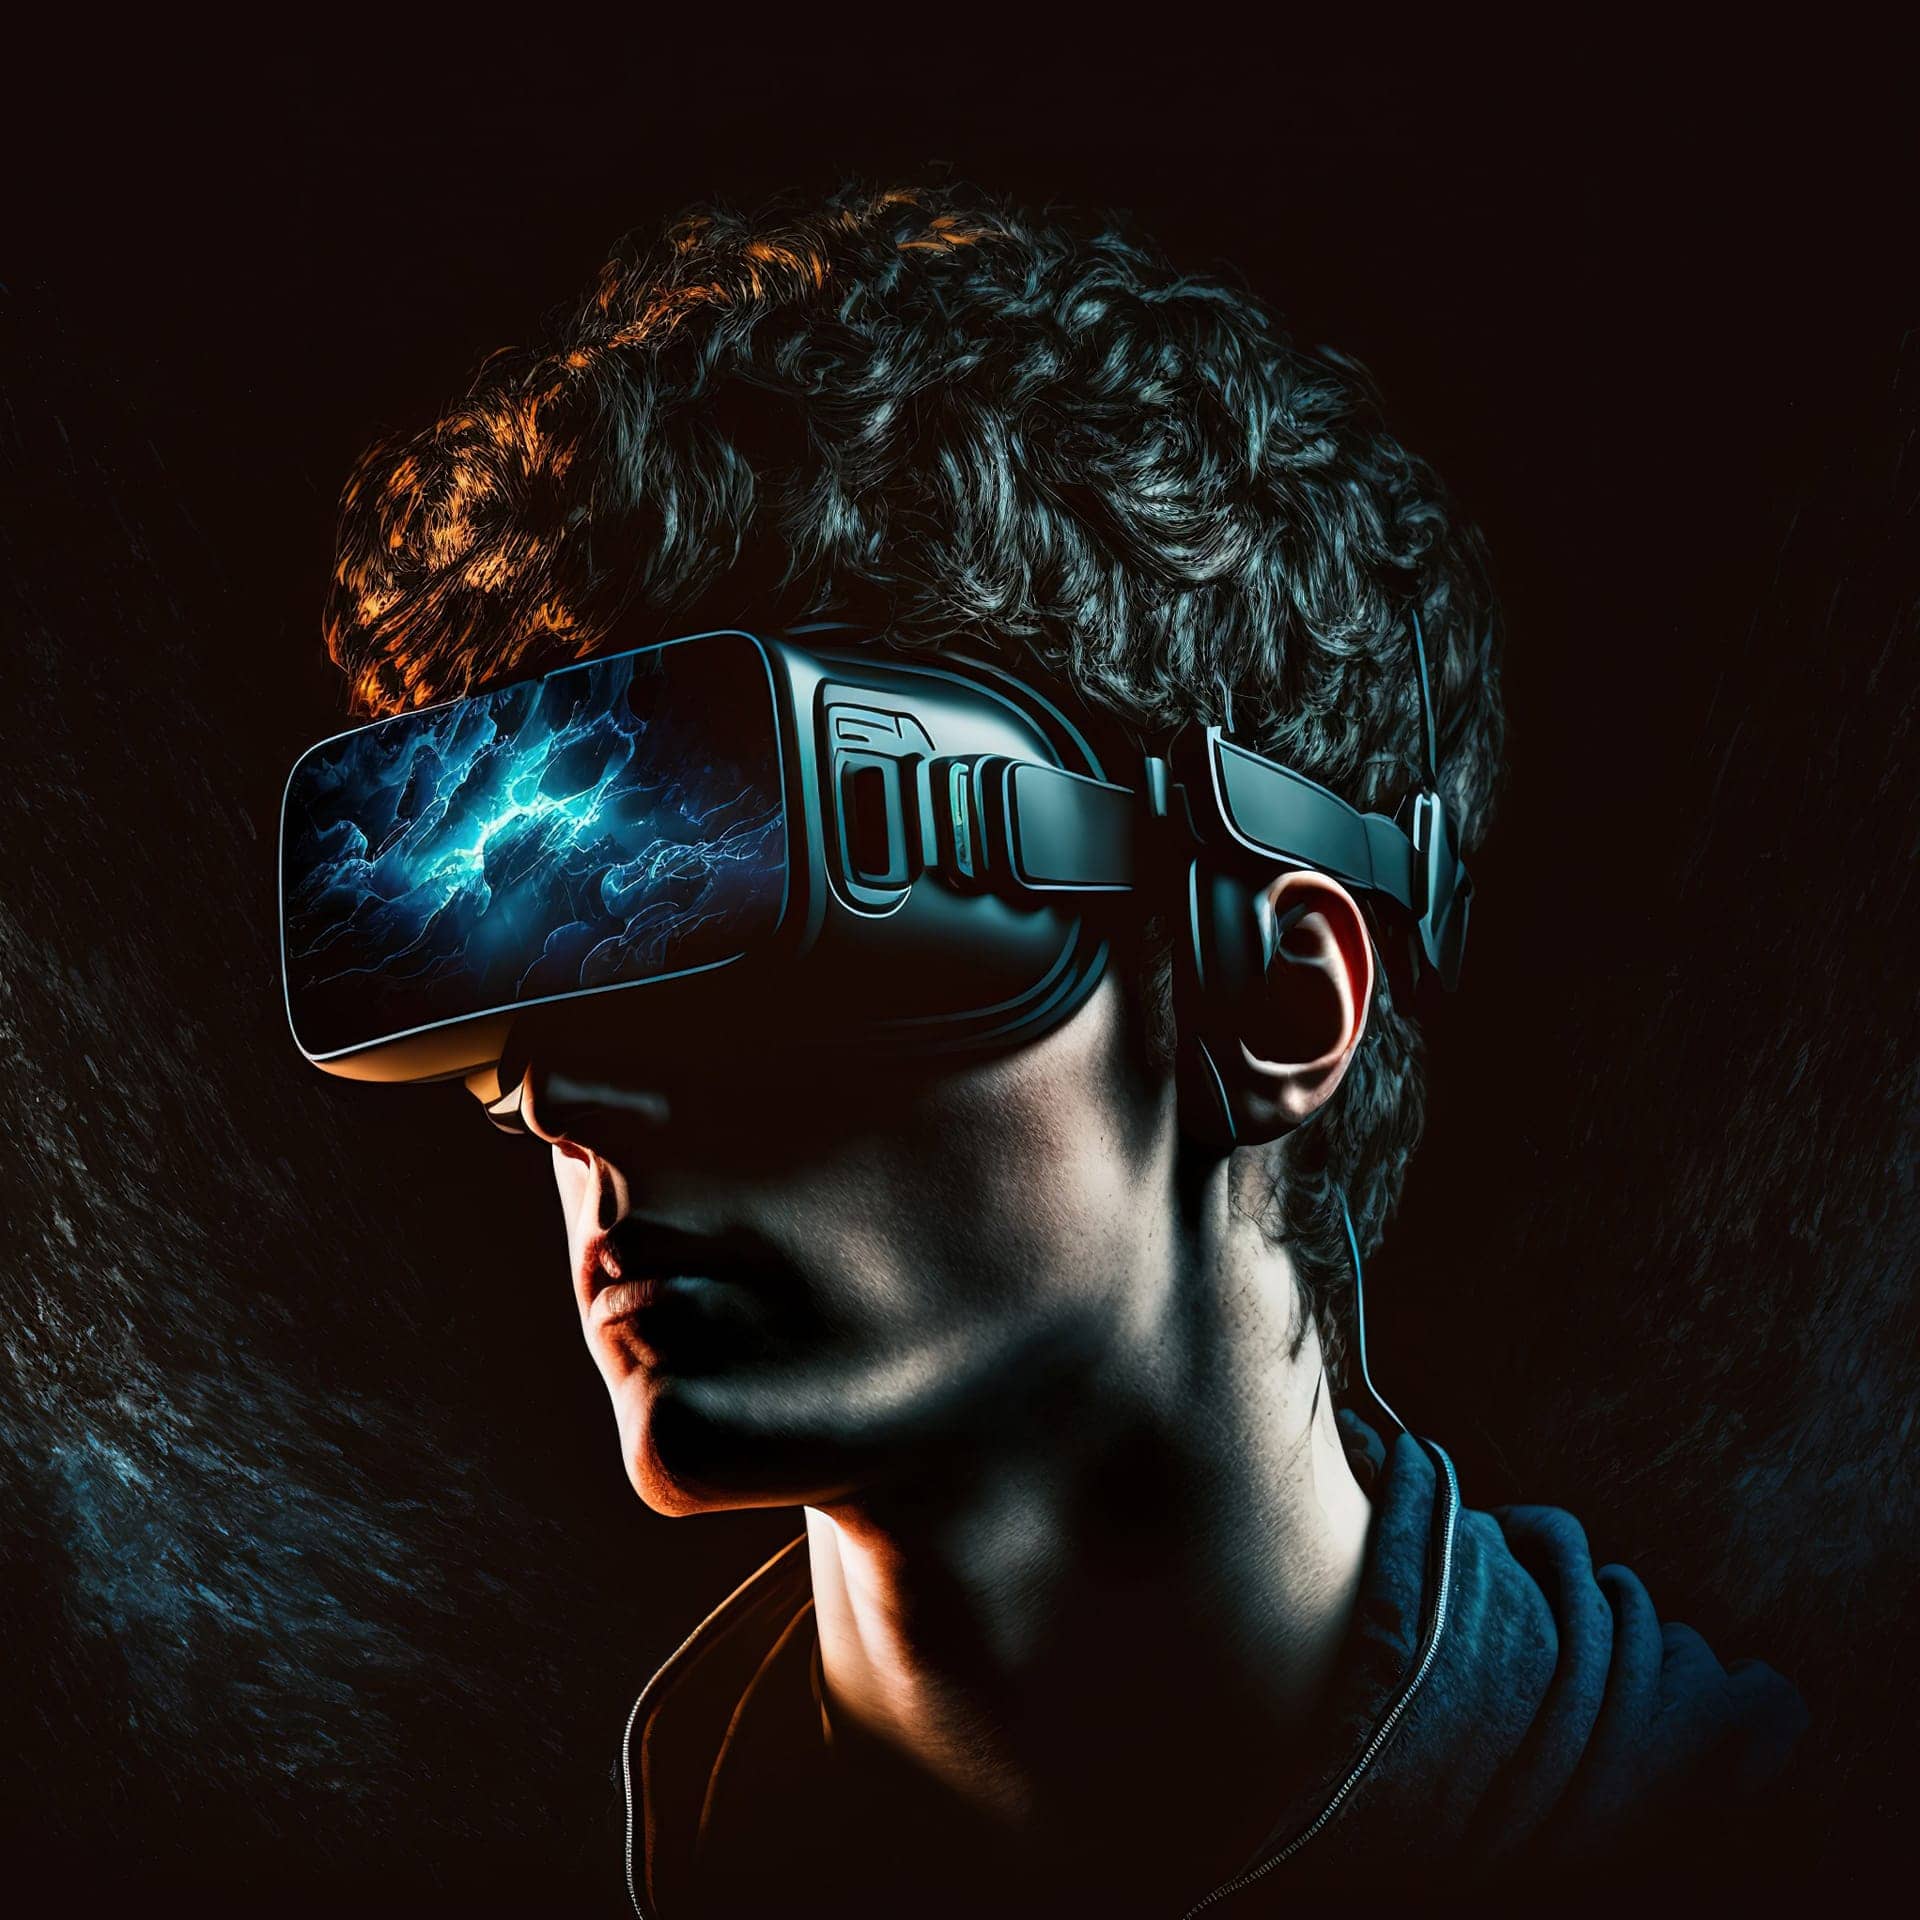 People with vr headset fine image